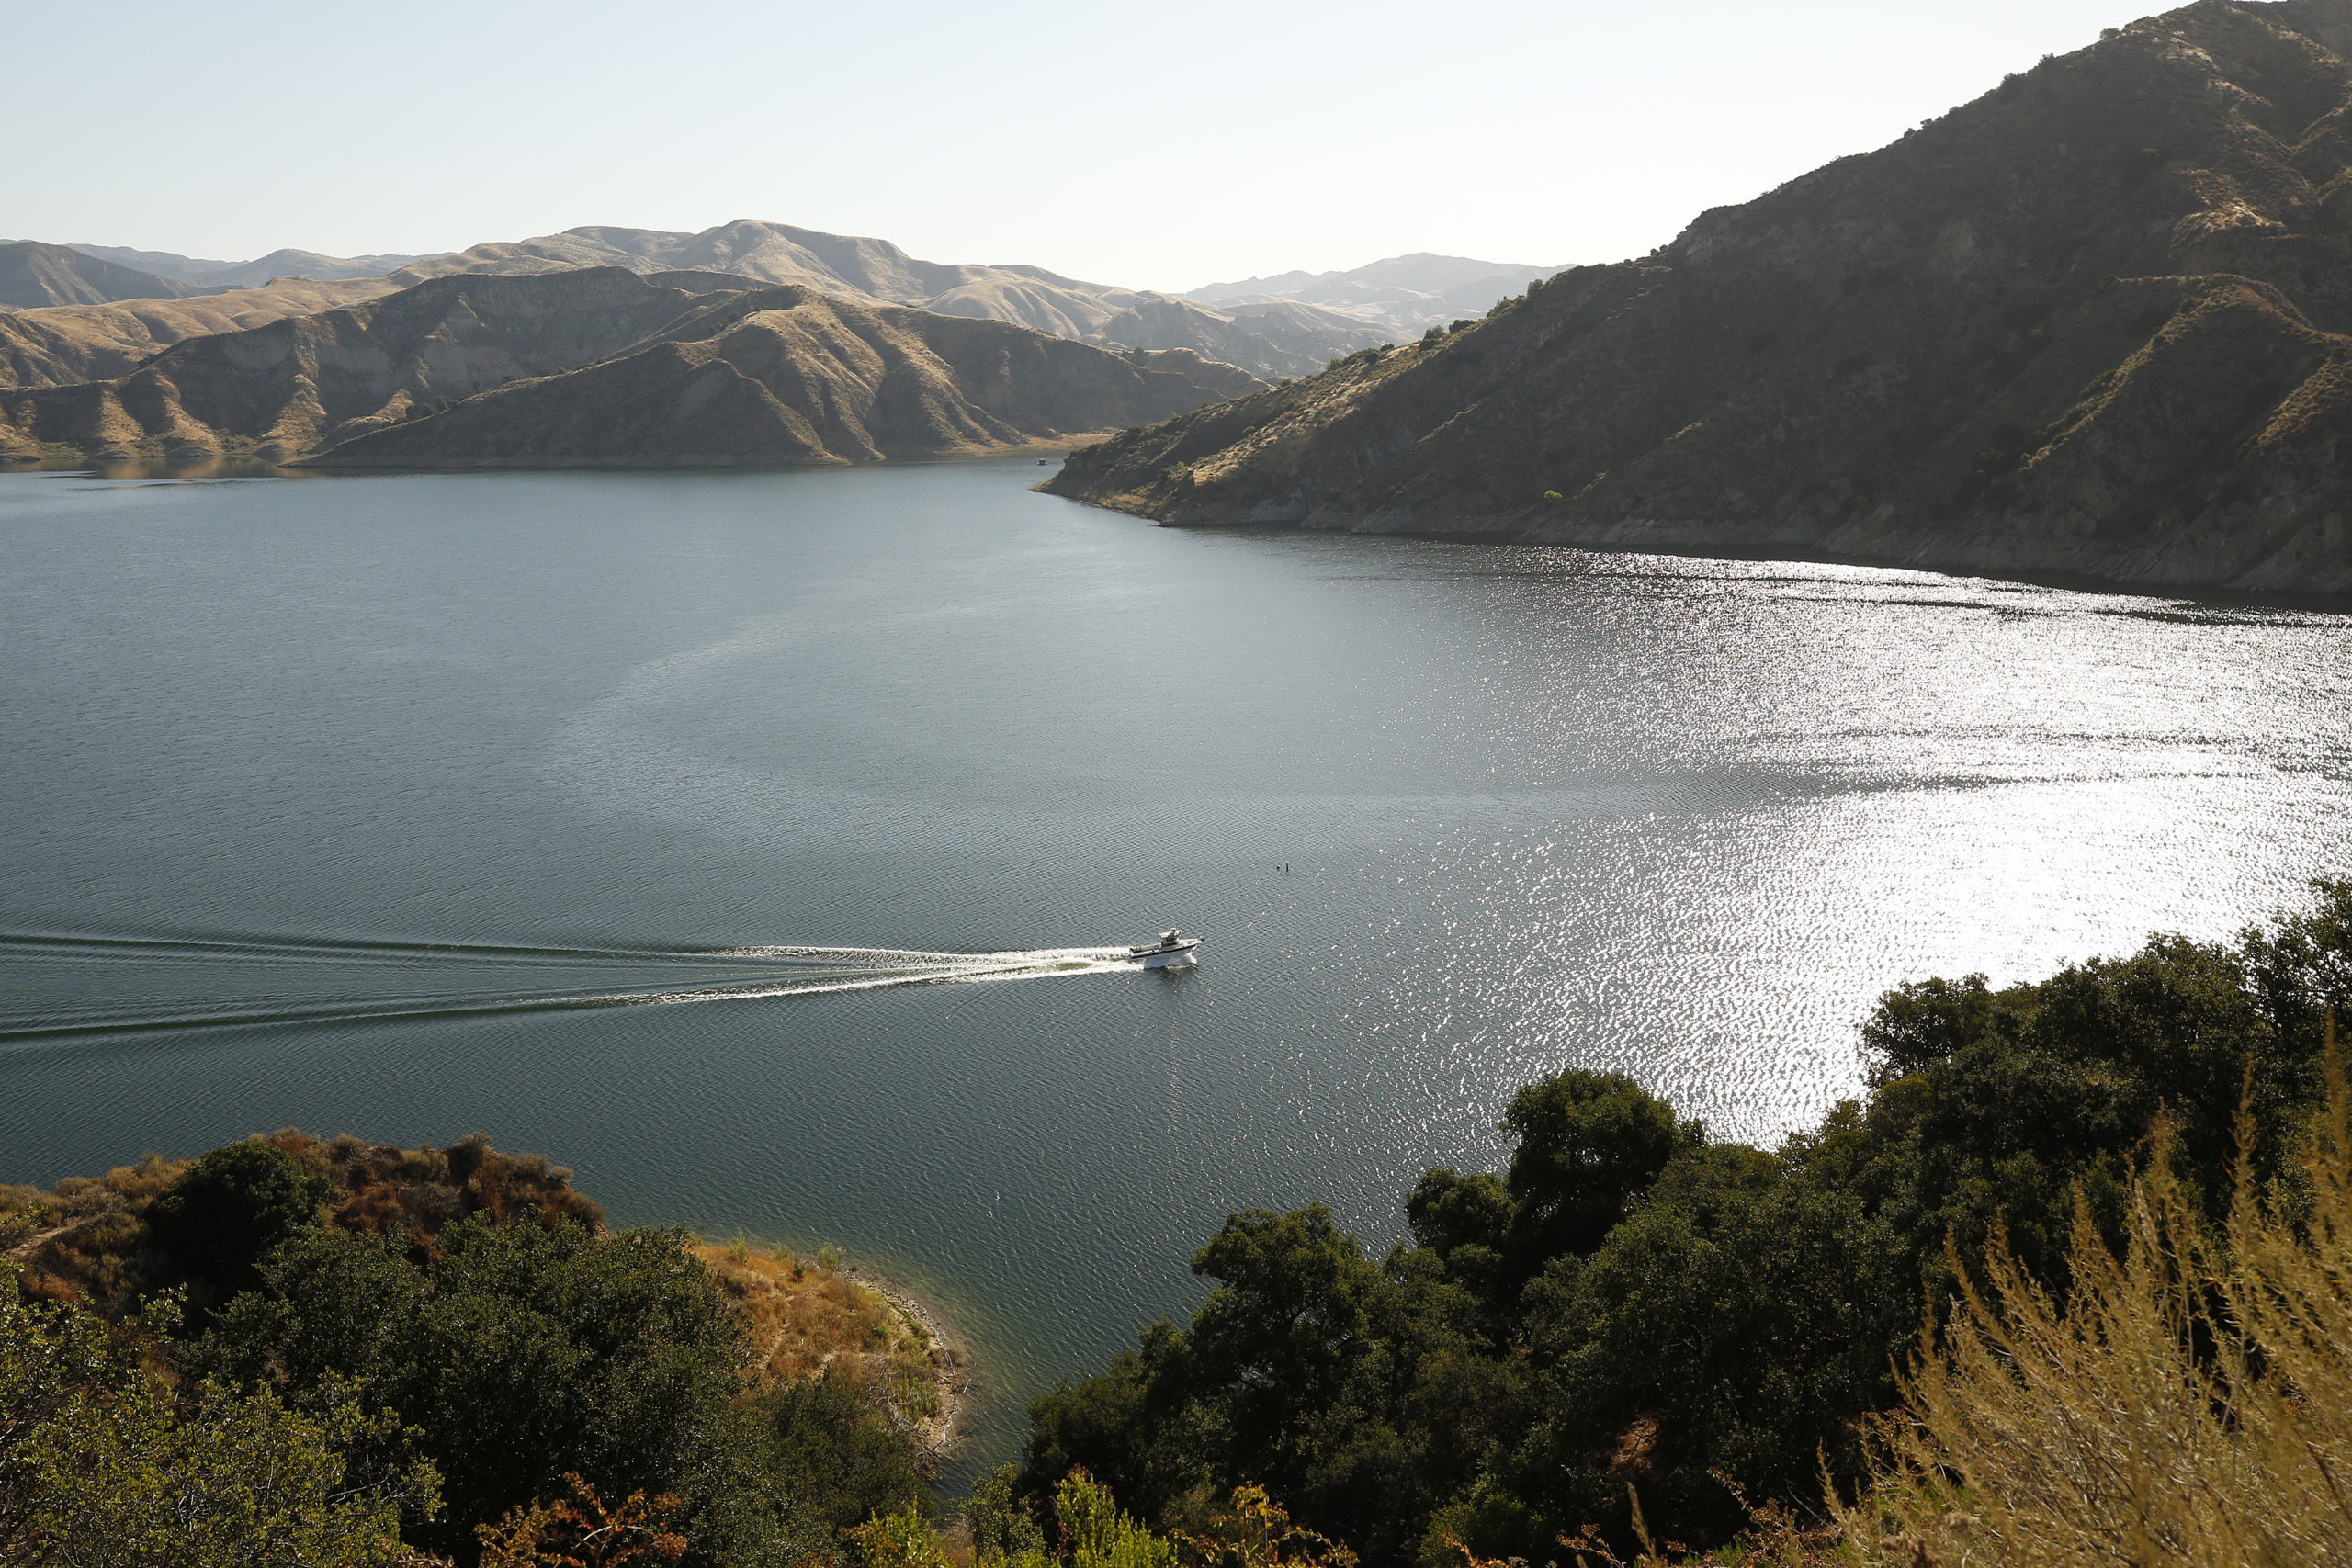 Ventura County Sheriffs Search and Rescue dive team located a body Monday morning in Lake Piru 